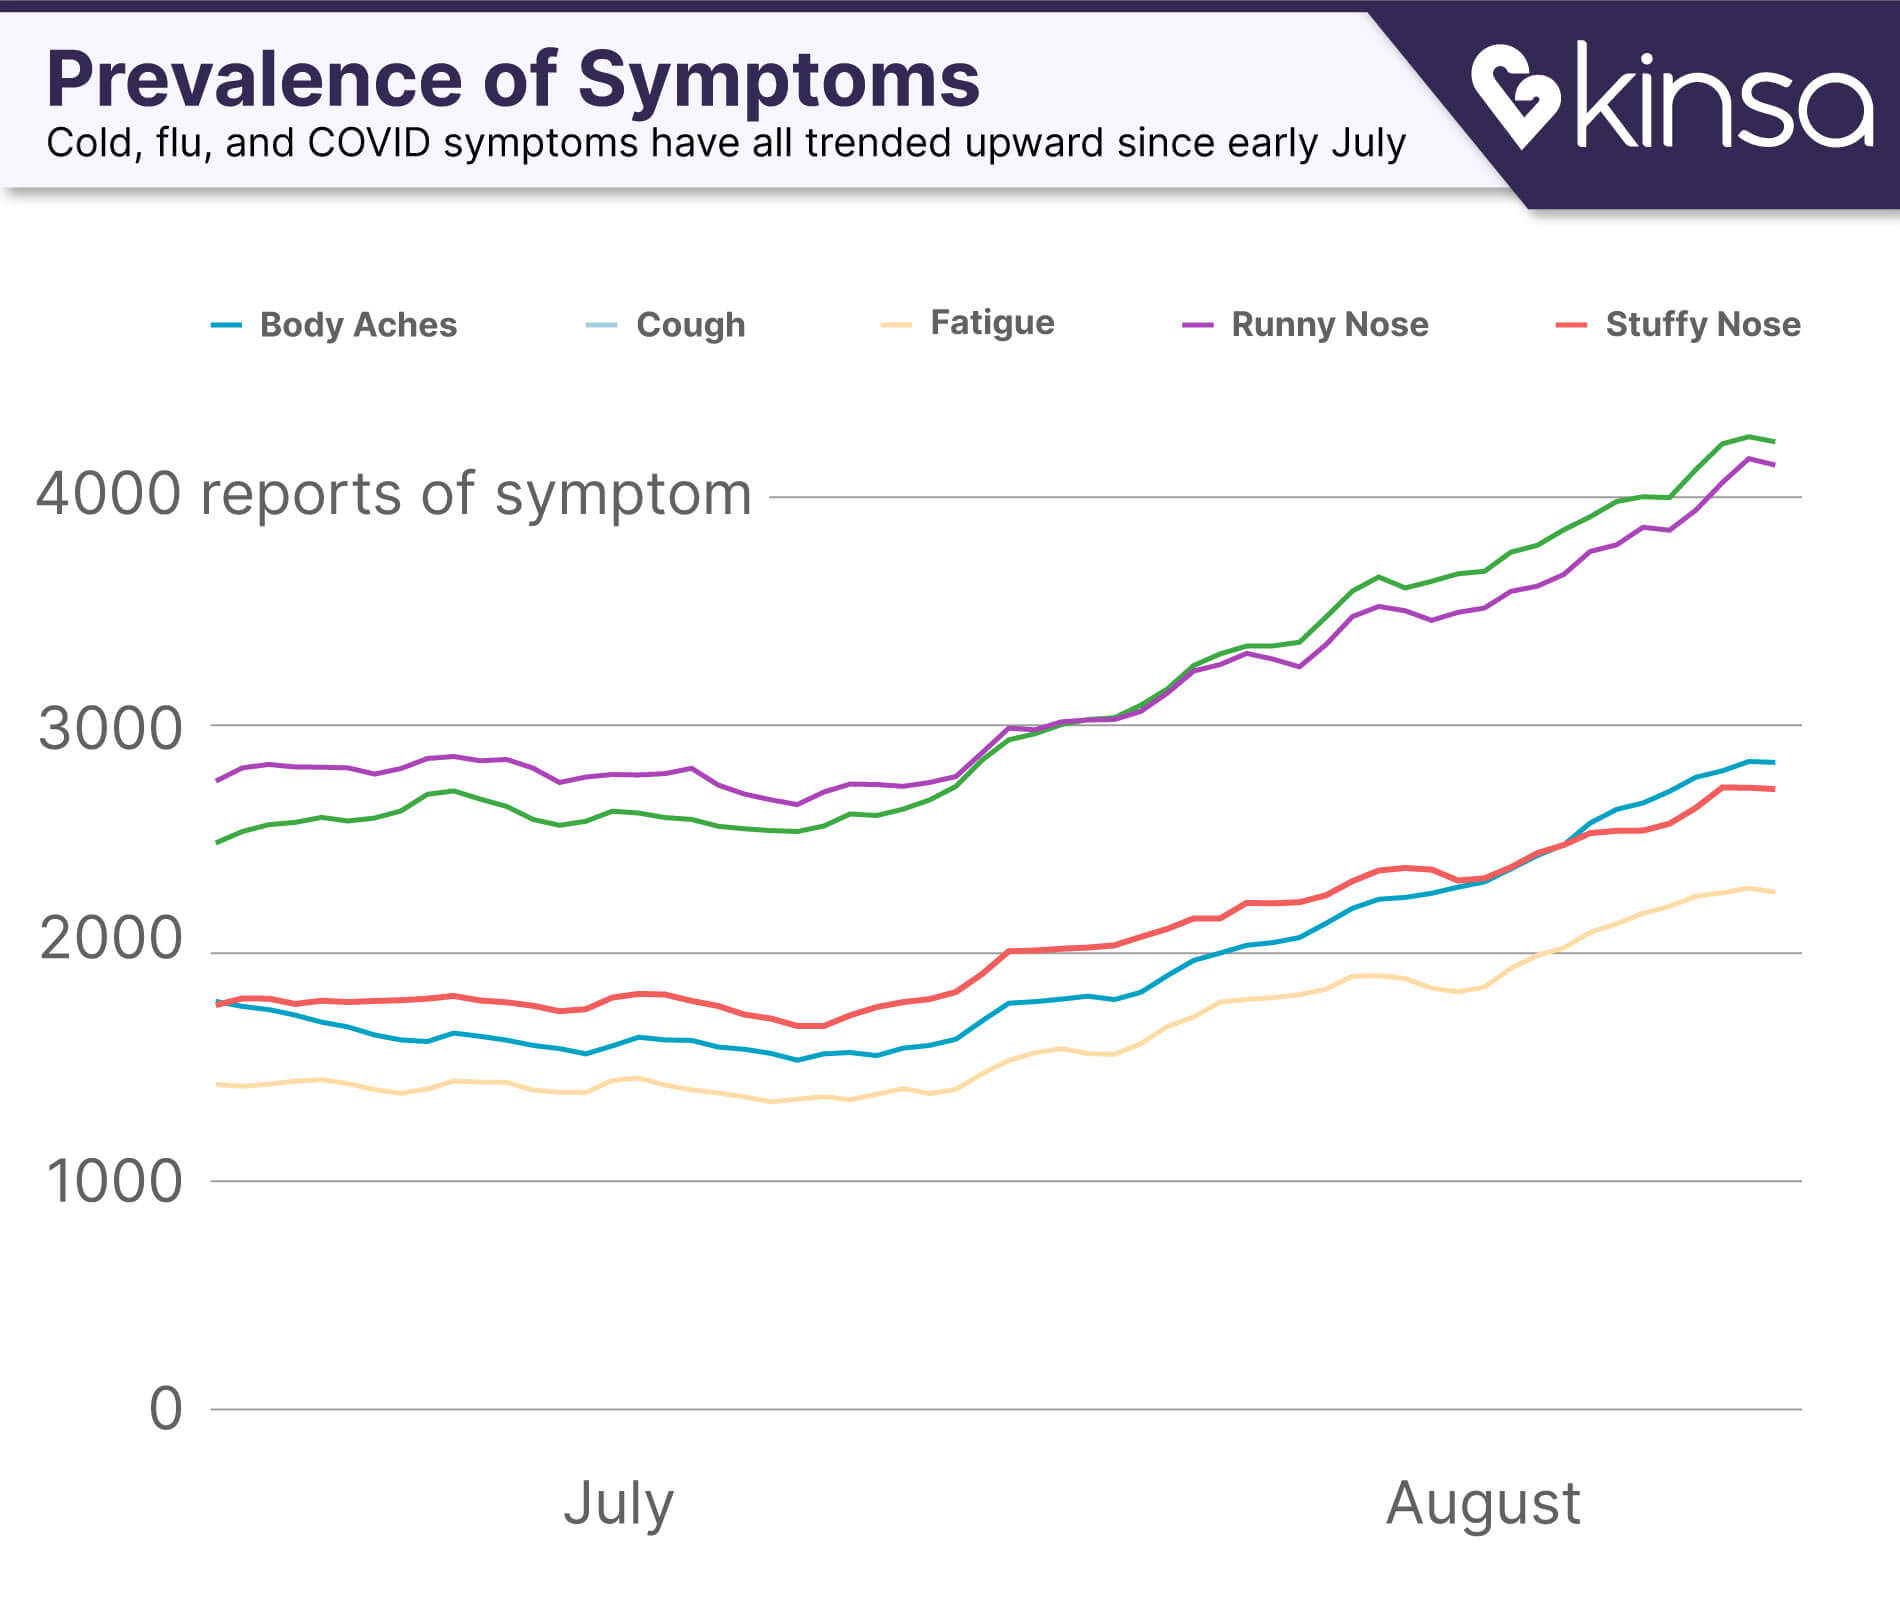 Chart showing all symptoms increasing since early July